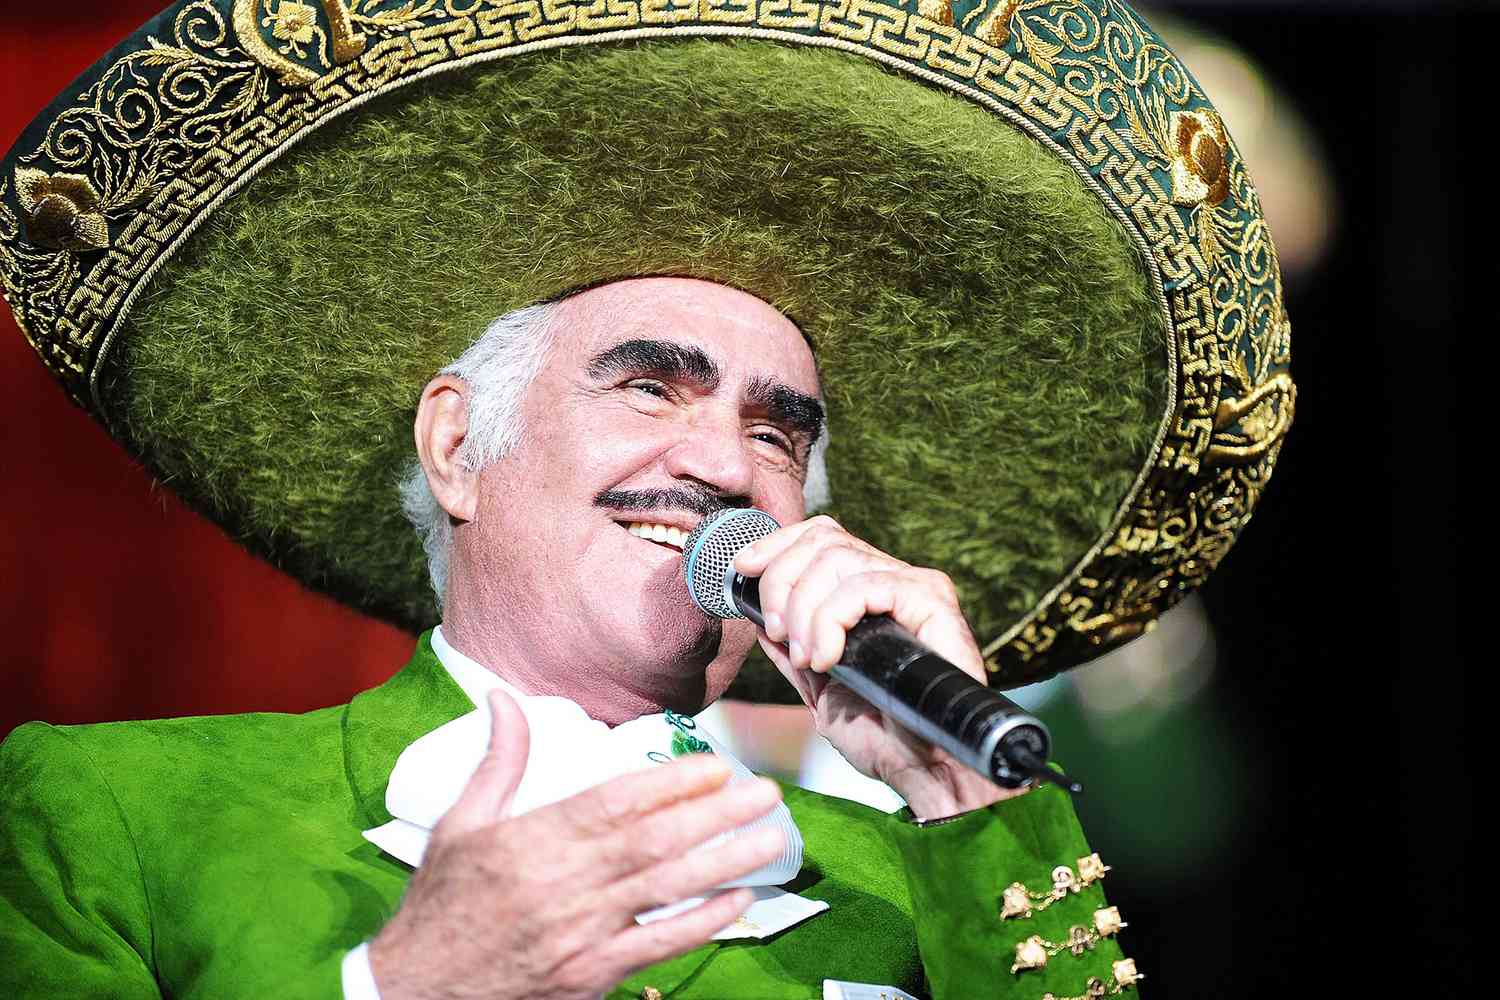 Mexican singer Vicente Fernandez performs at AmericanAirlines Arena on October 10, 2010 in Miami, Florida.